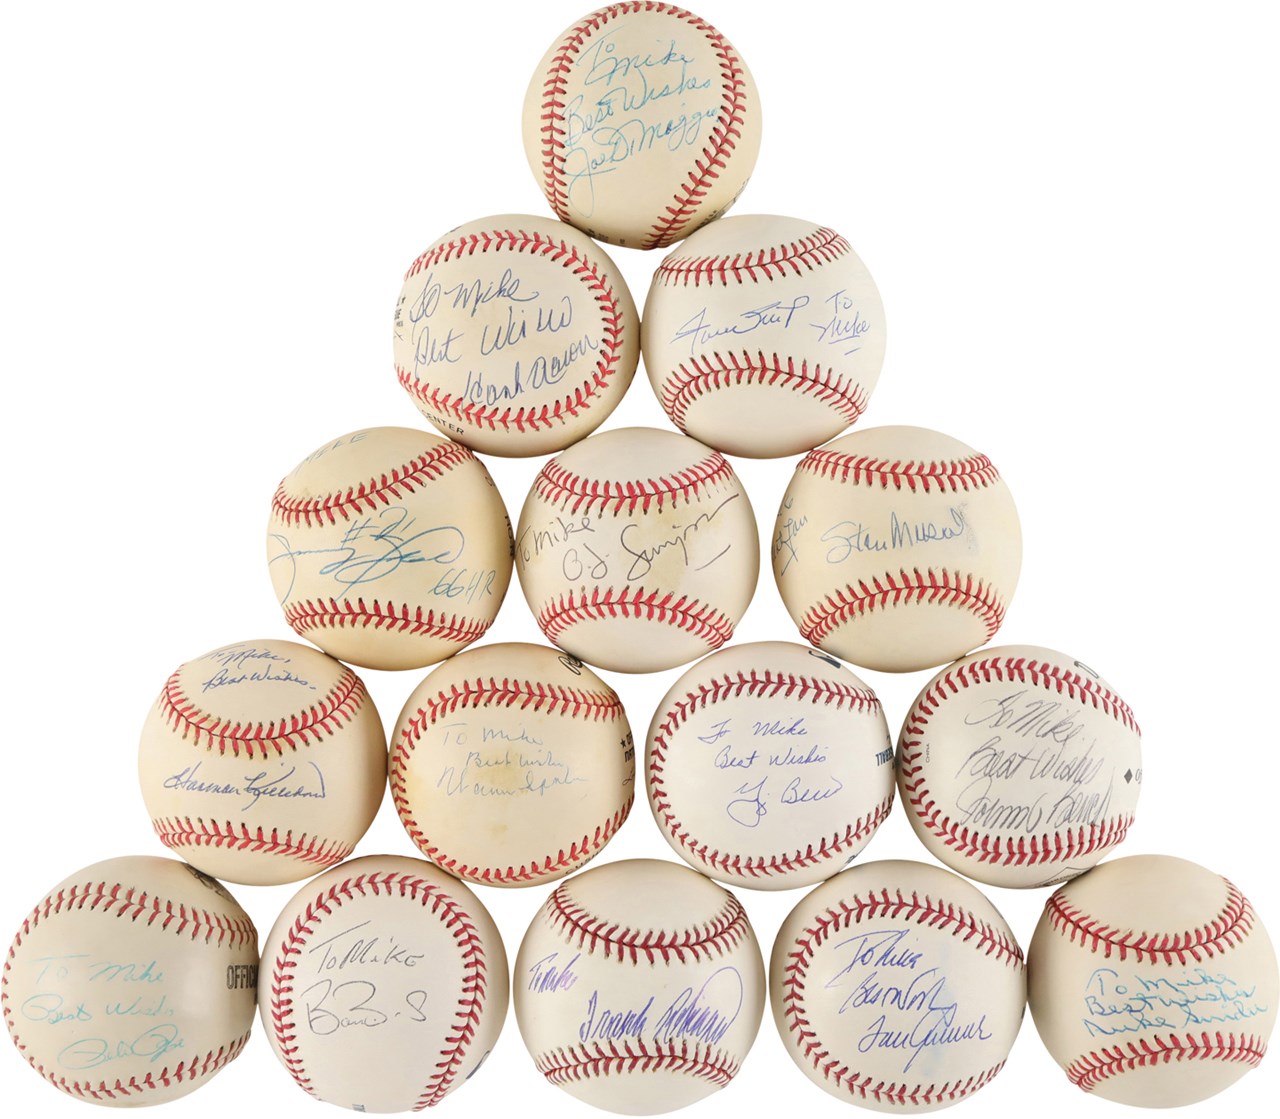 Signed Baseballs Personalized to Mike (30)